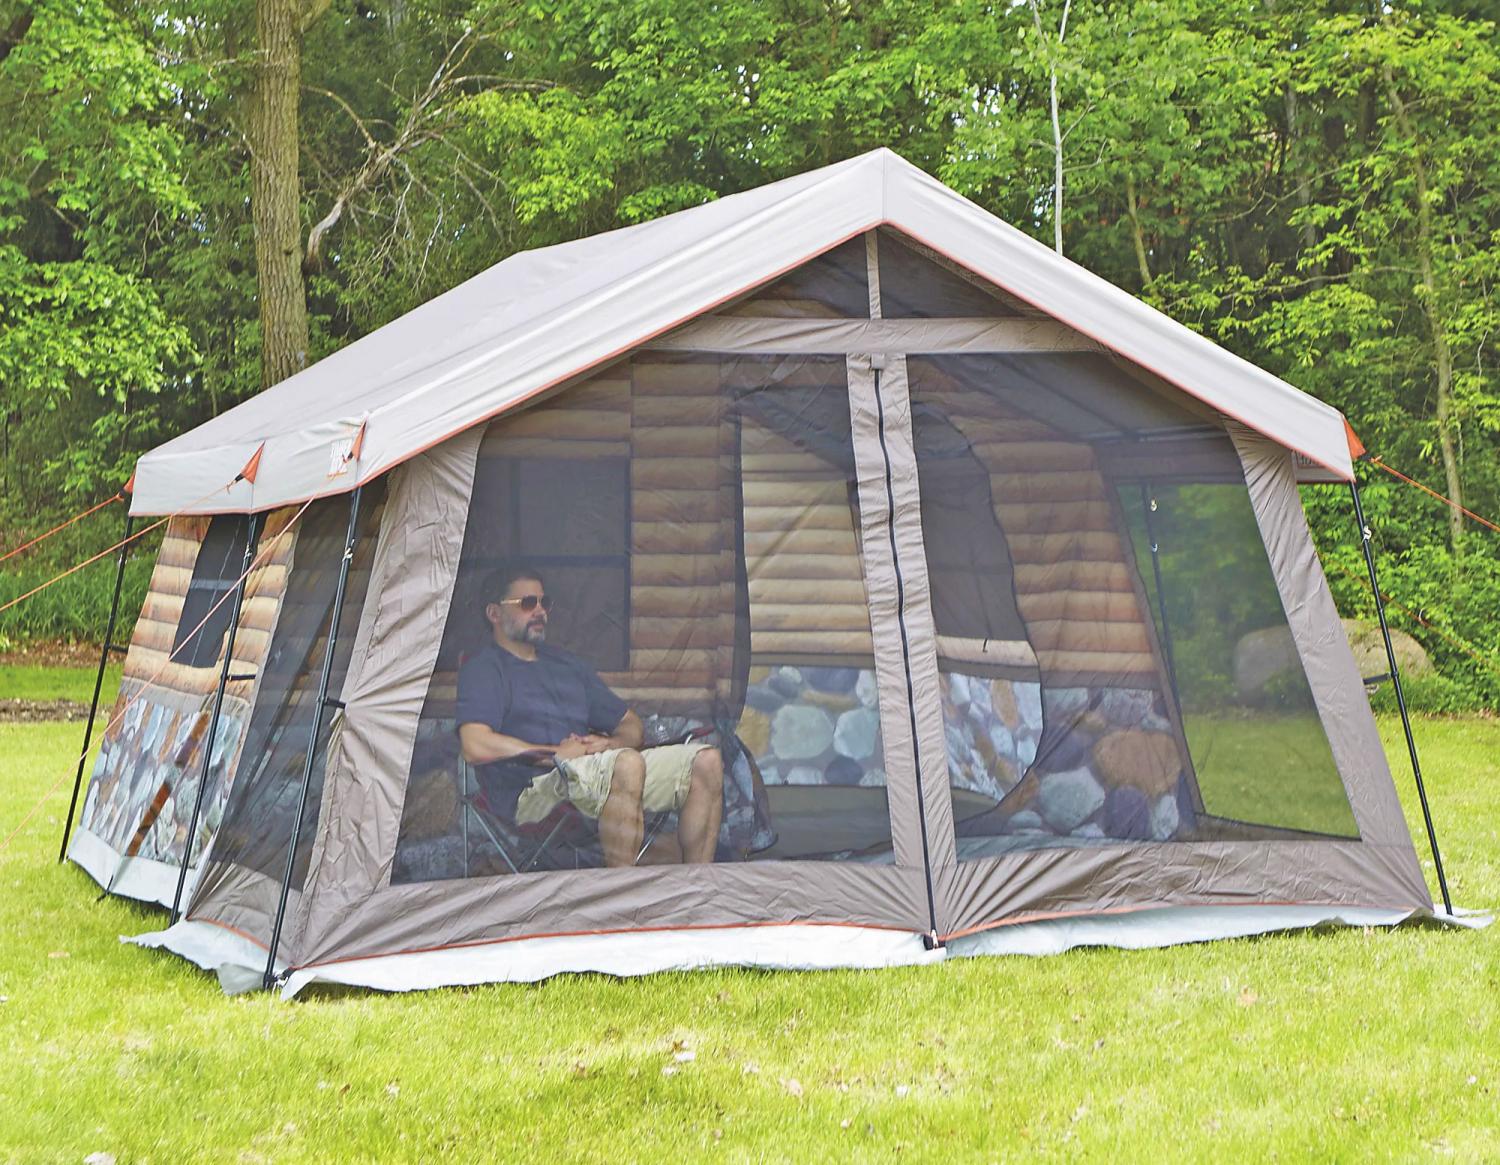 Log Cabin Tent With Front Porch - Giant 8-person tent looks just like a log cabin